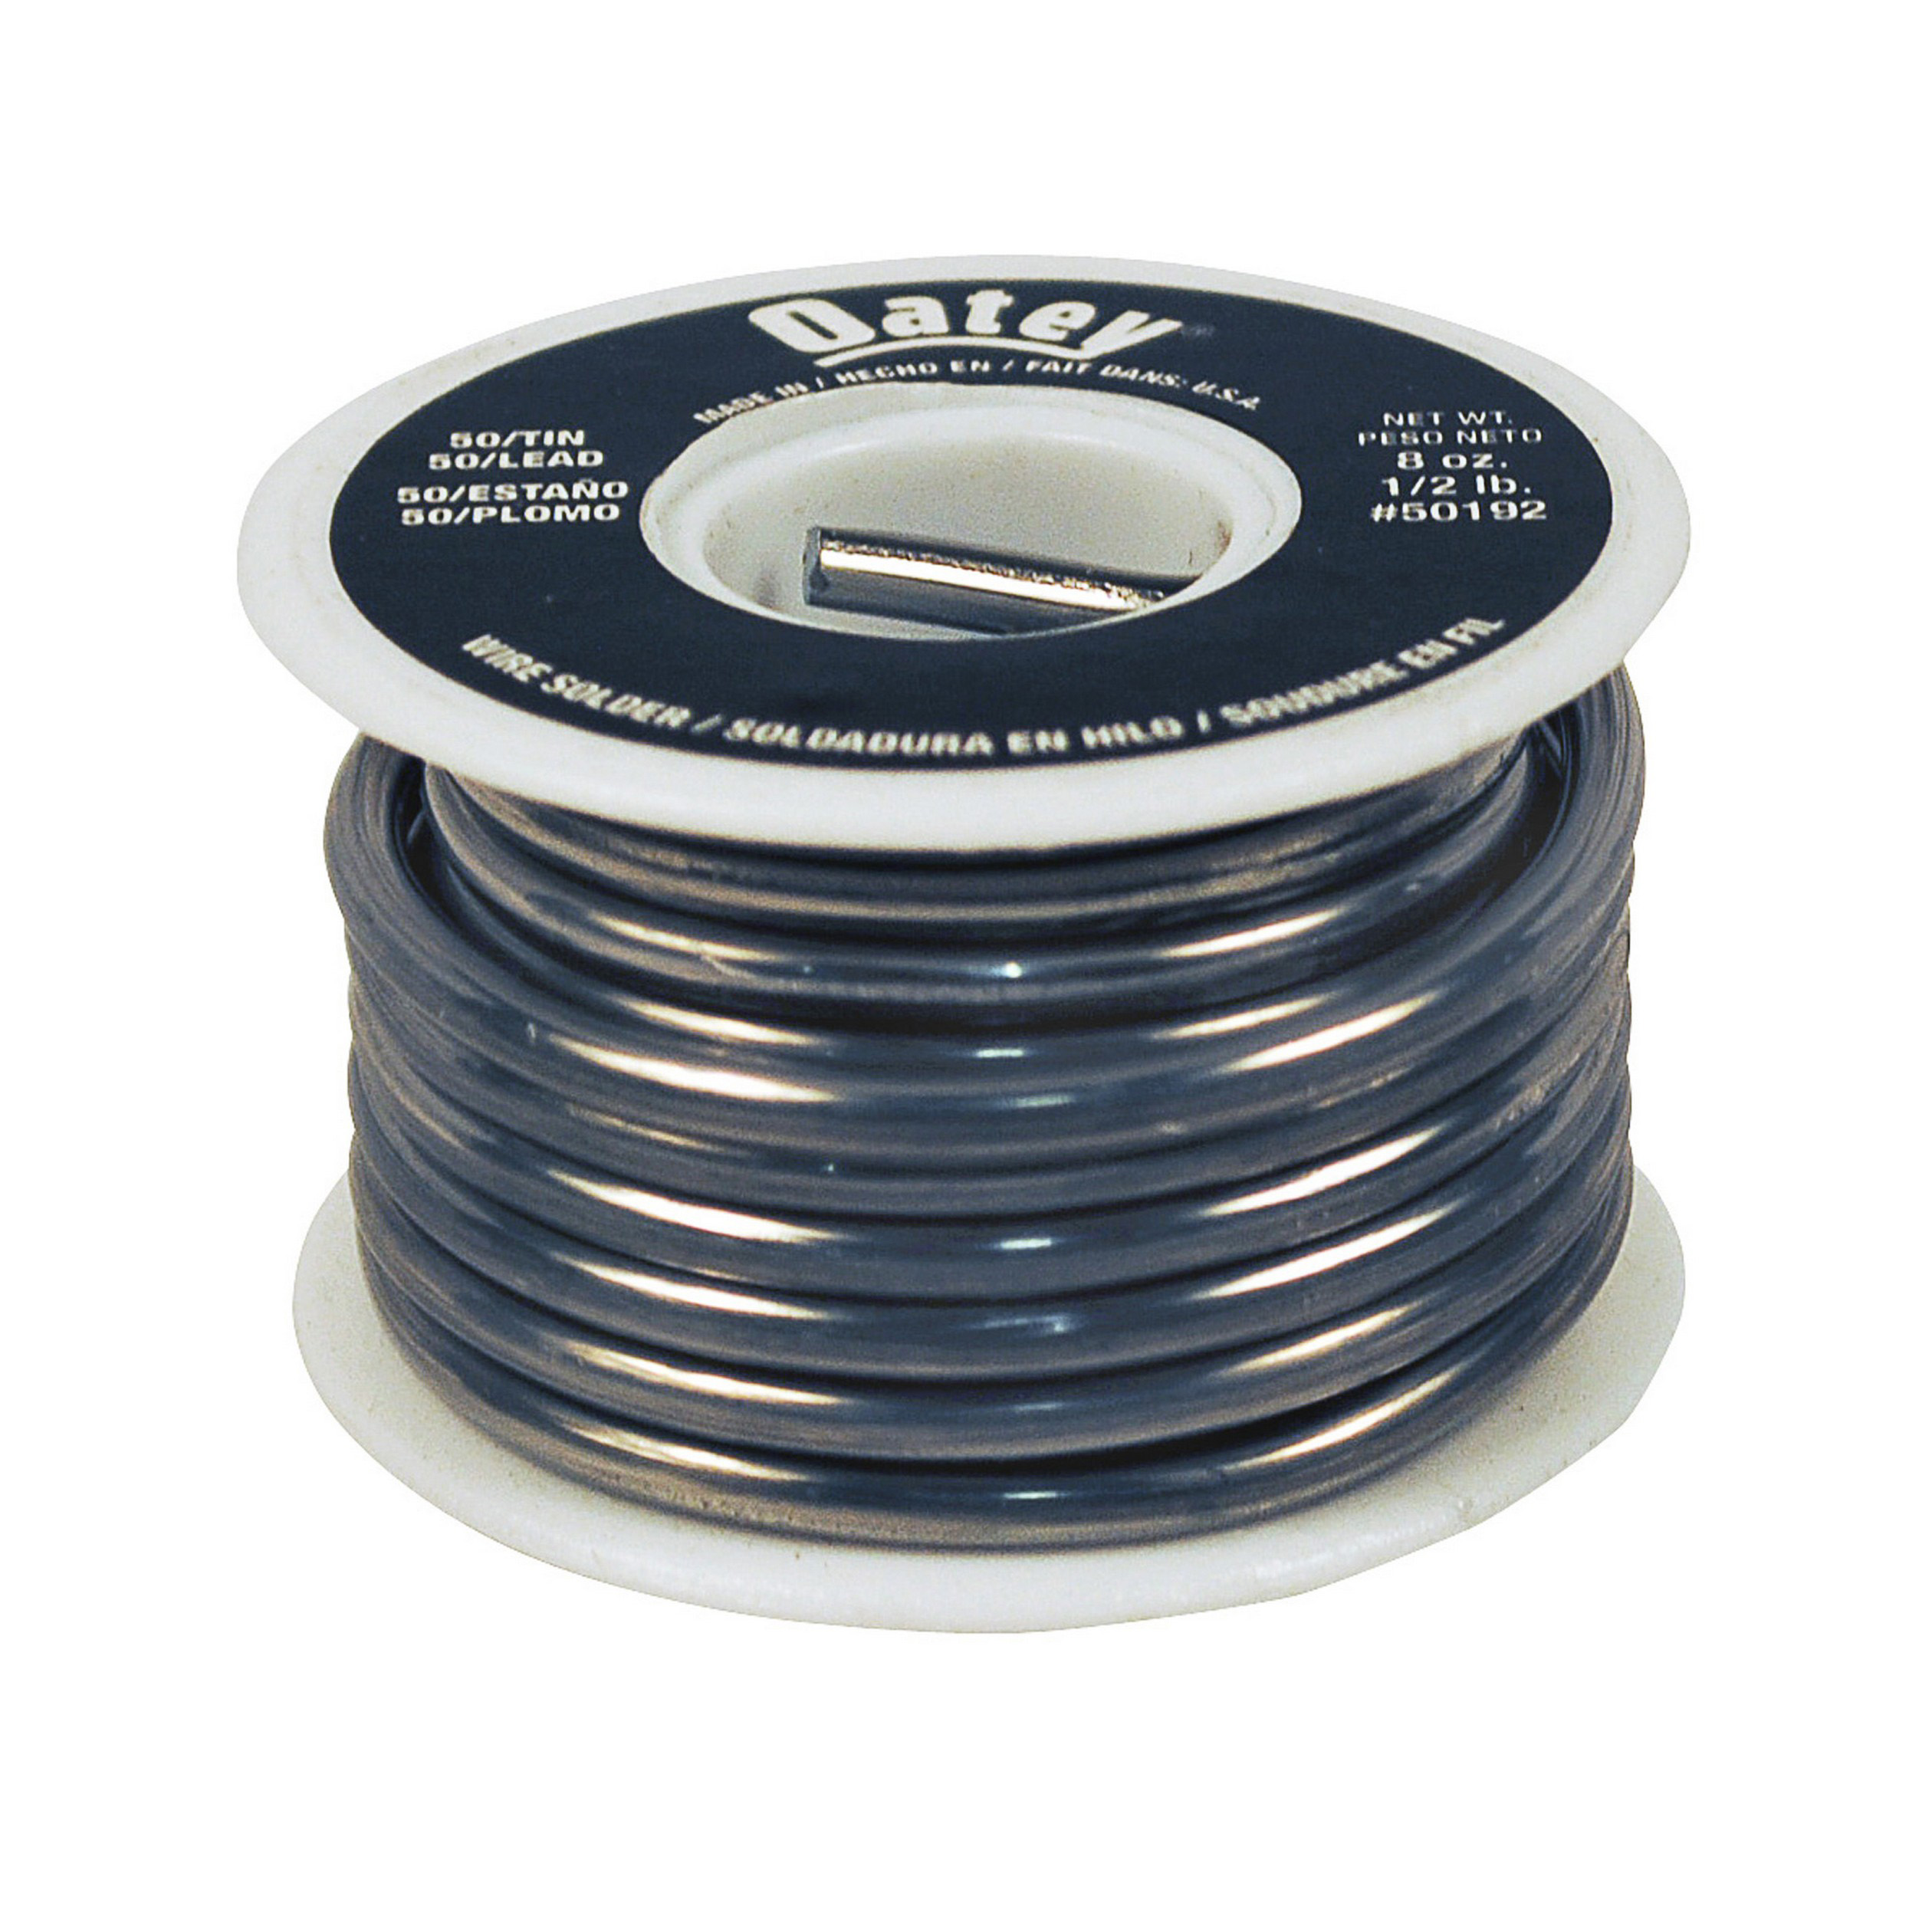 SOLDER 50/50 WIRE 1/2LB RL 50192 - CONTAINS LEAD